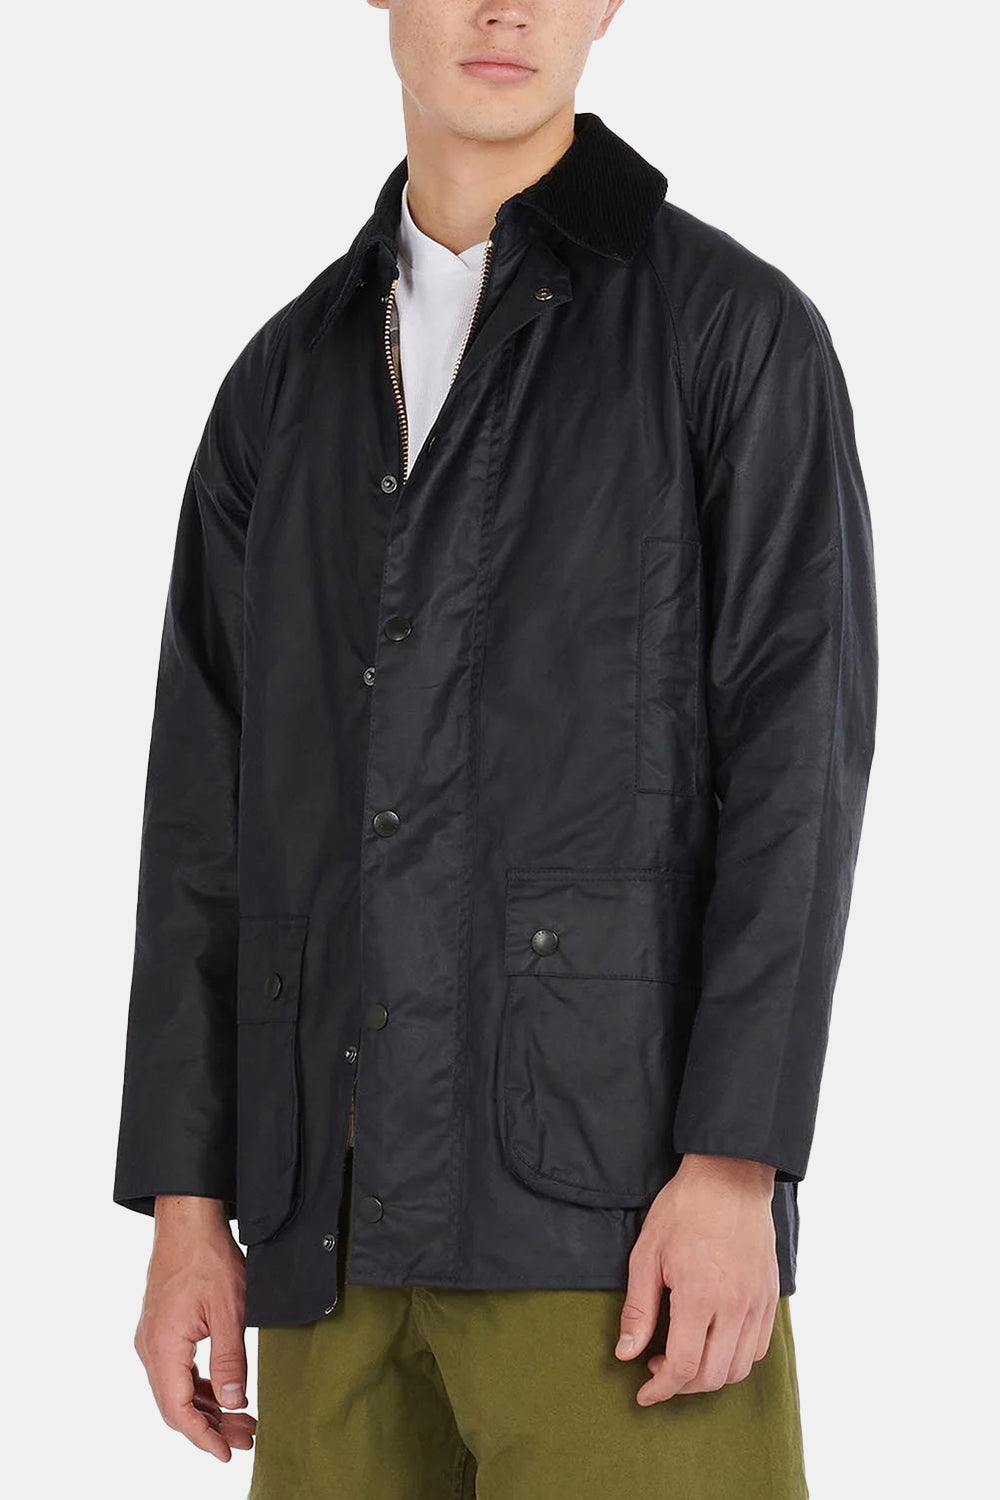 Barbour White Label SL Beaufort Waxed Cotton Jacket (Navy)